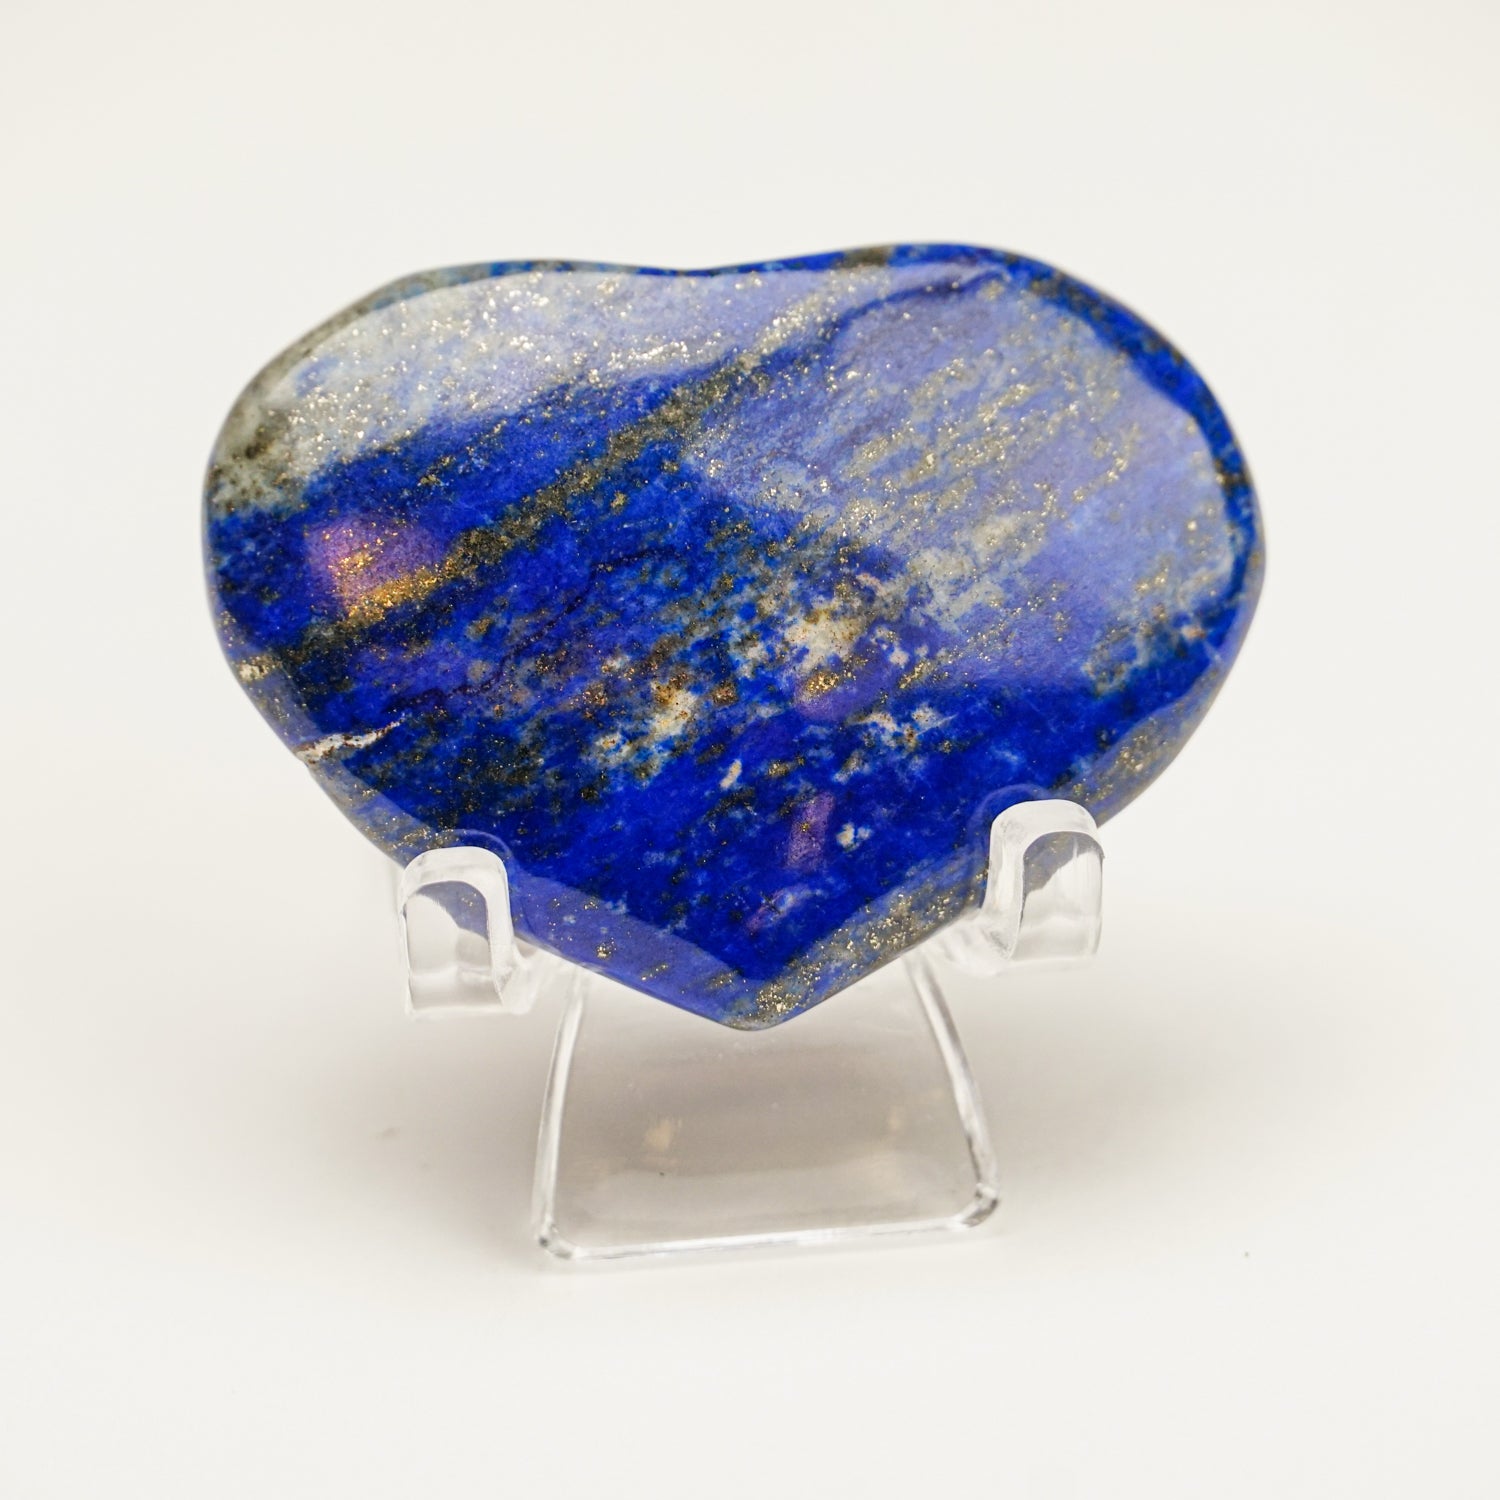 Polished Lapis Lazuli Heart from Afghanistan (31 grams)